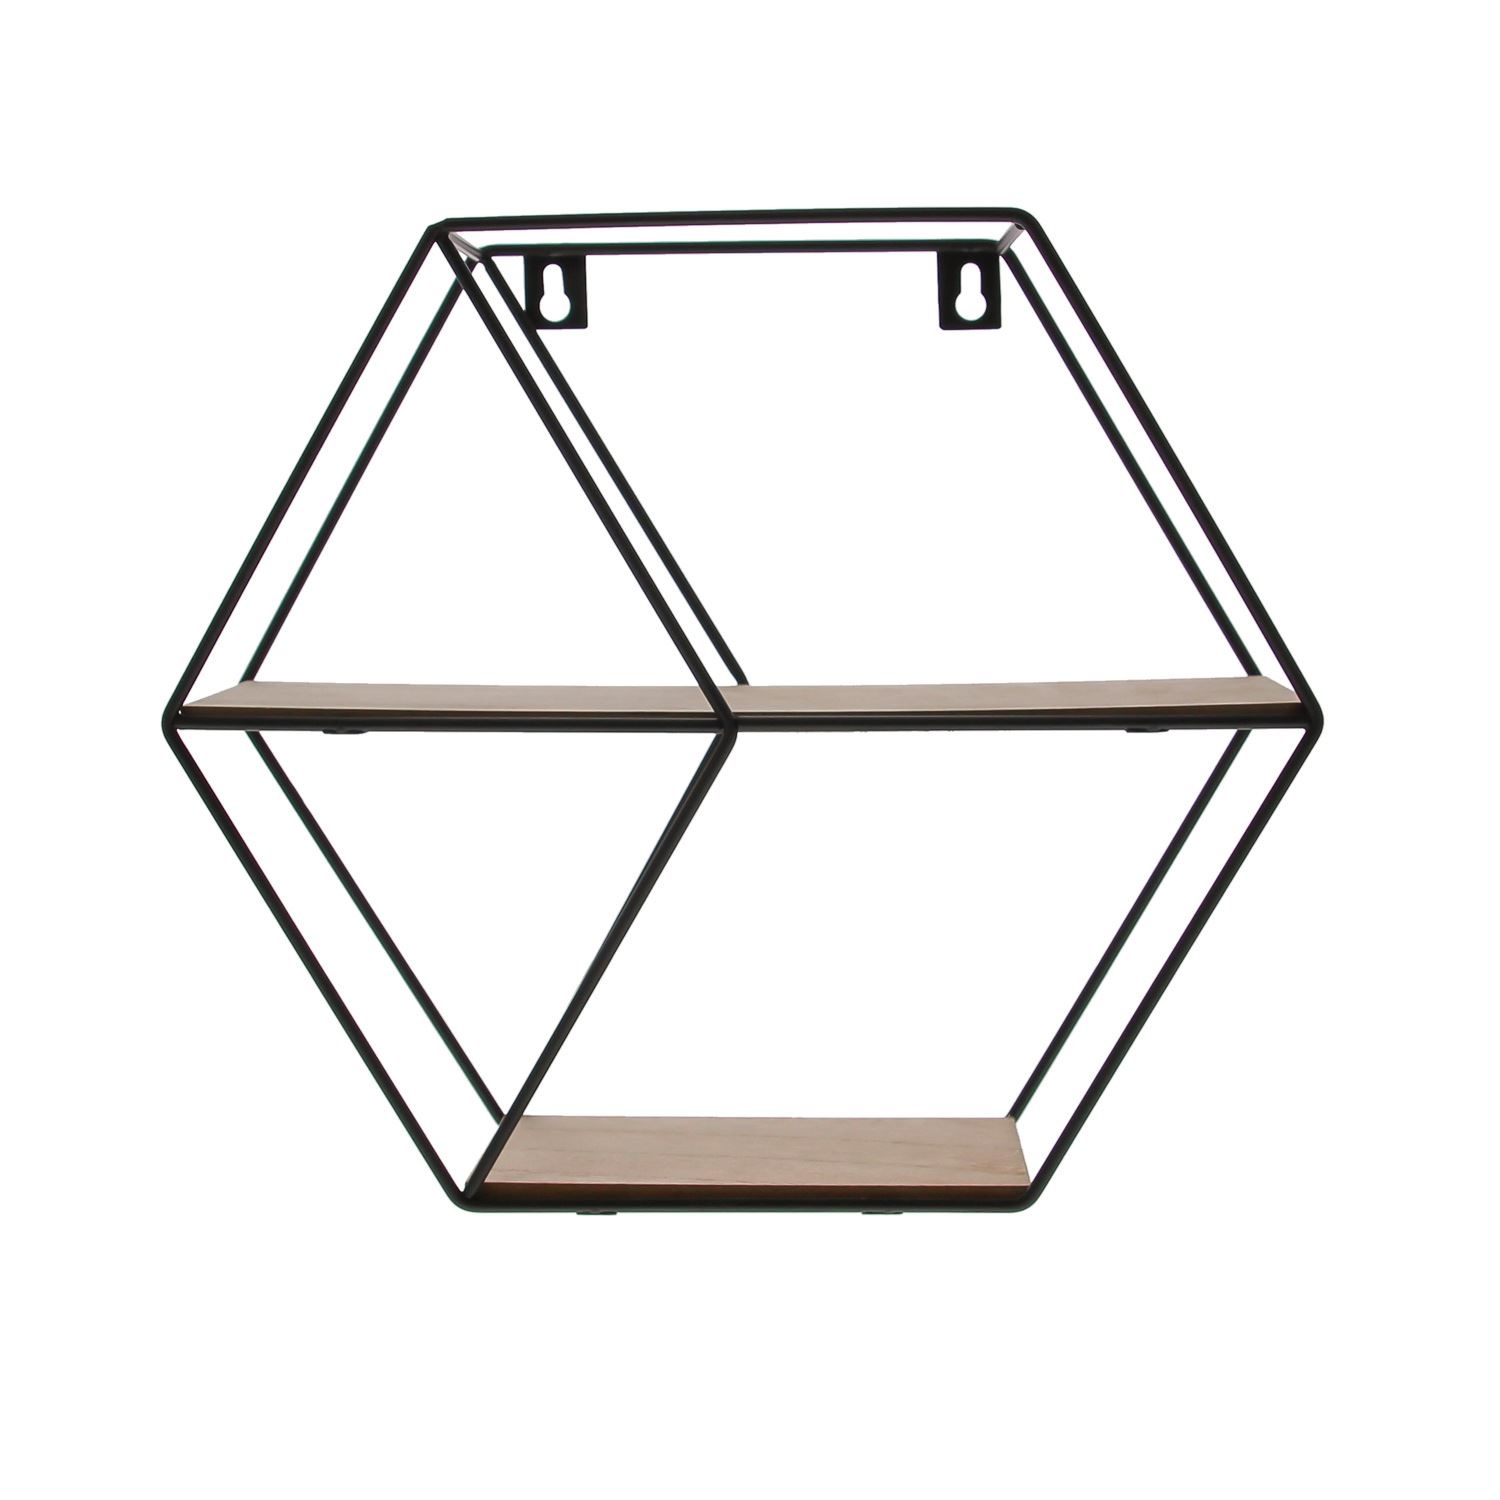 2-stage hexagon metal and natural wood black - 280*243*80mm - 1 piece